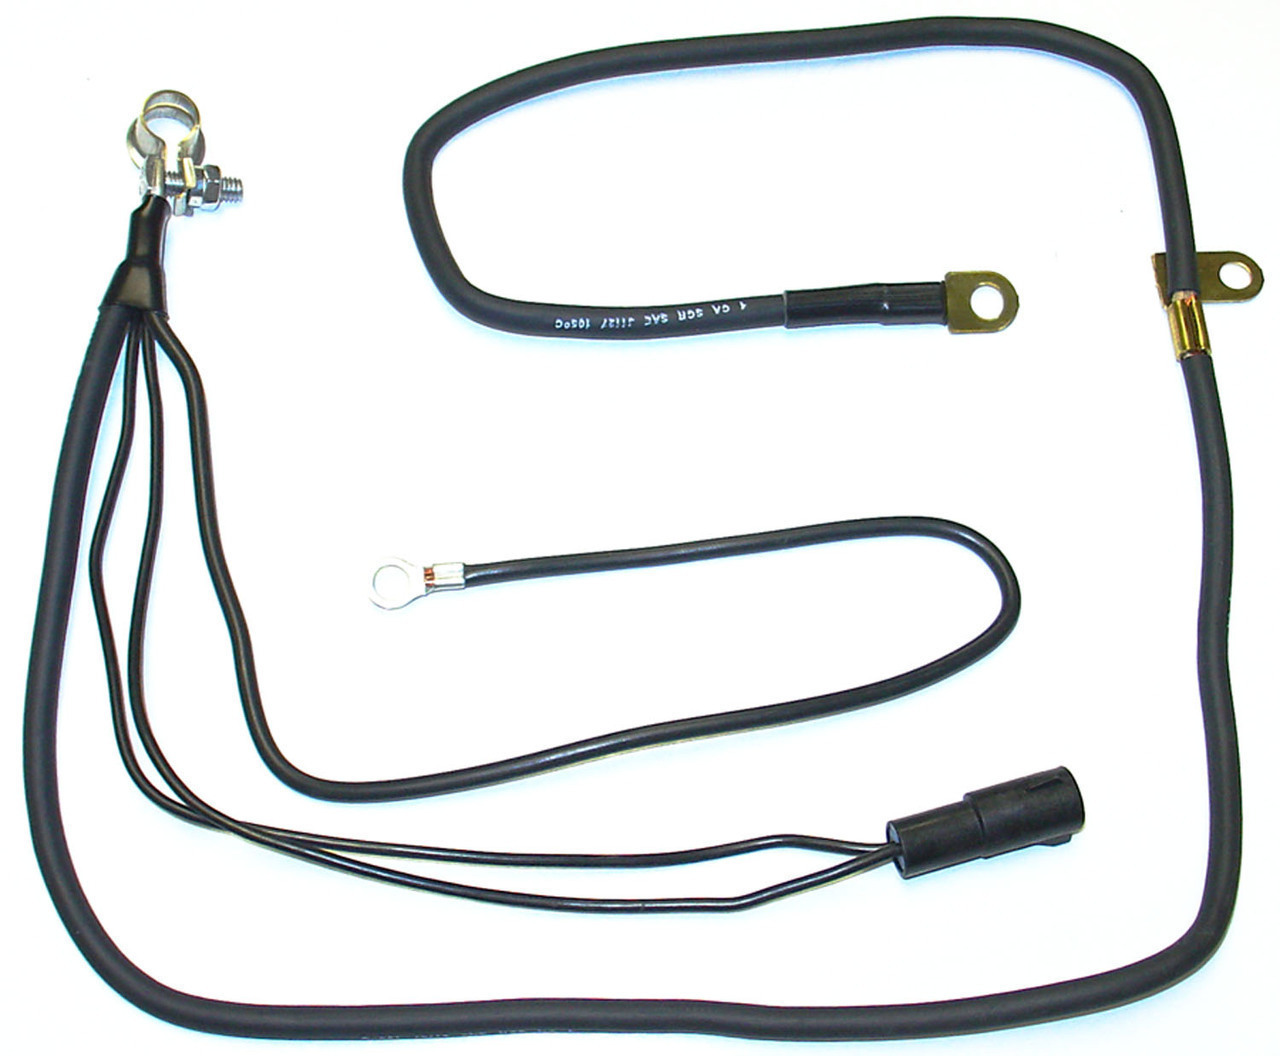 1993 Ford explorer battery cable #4